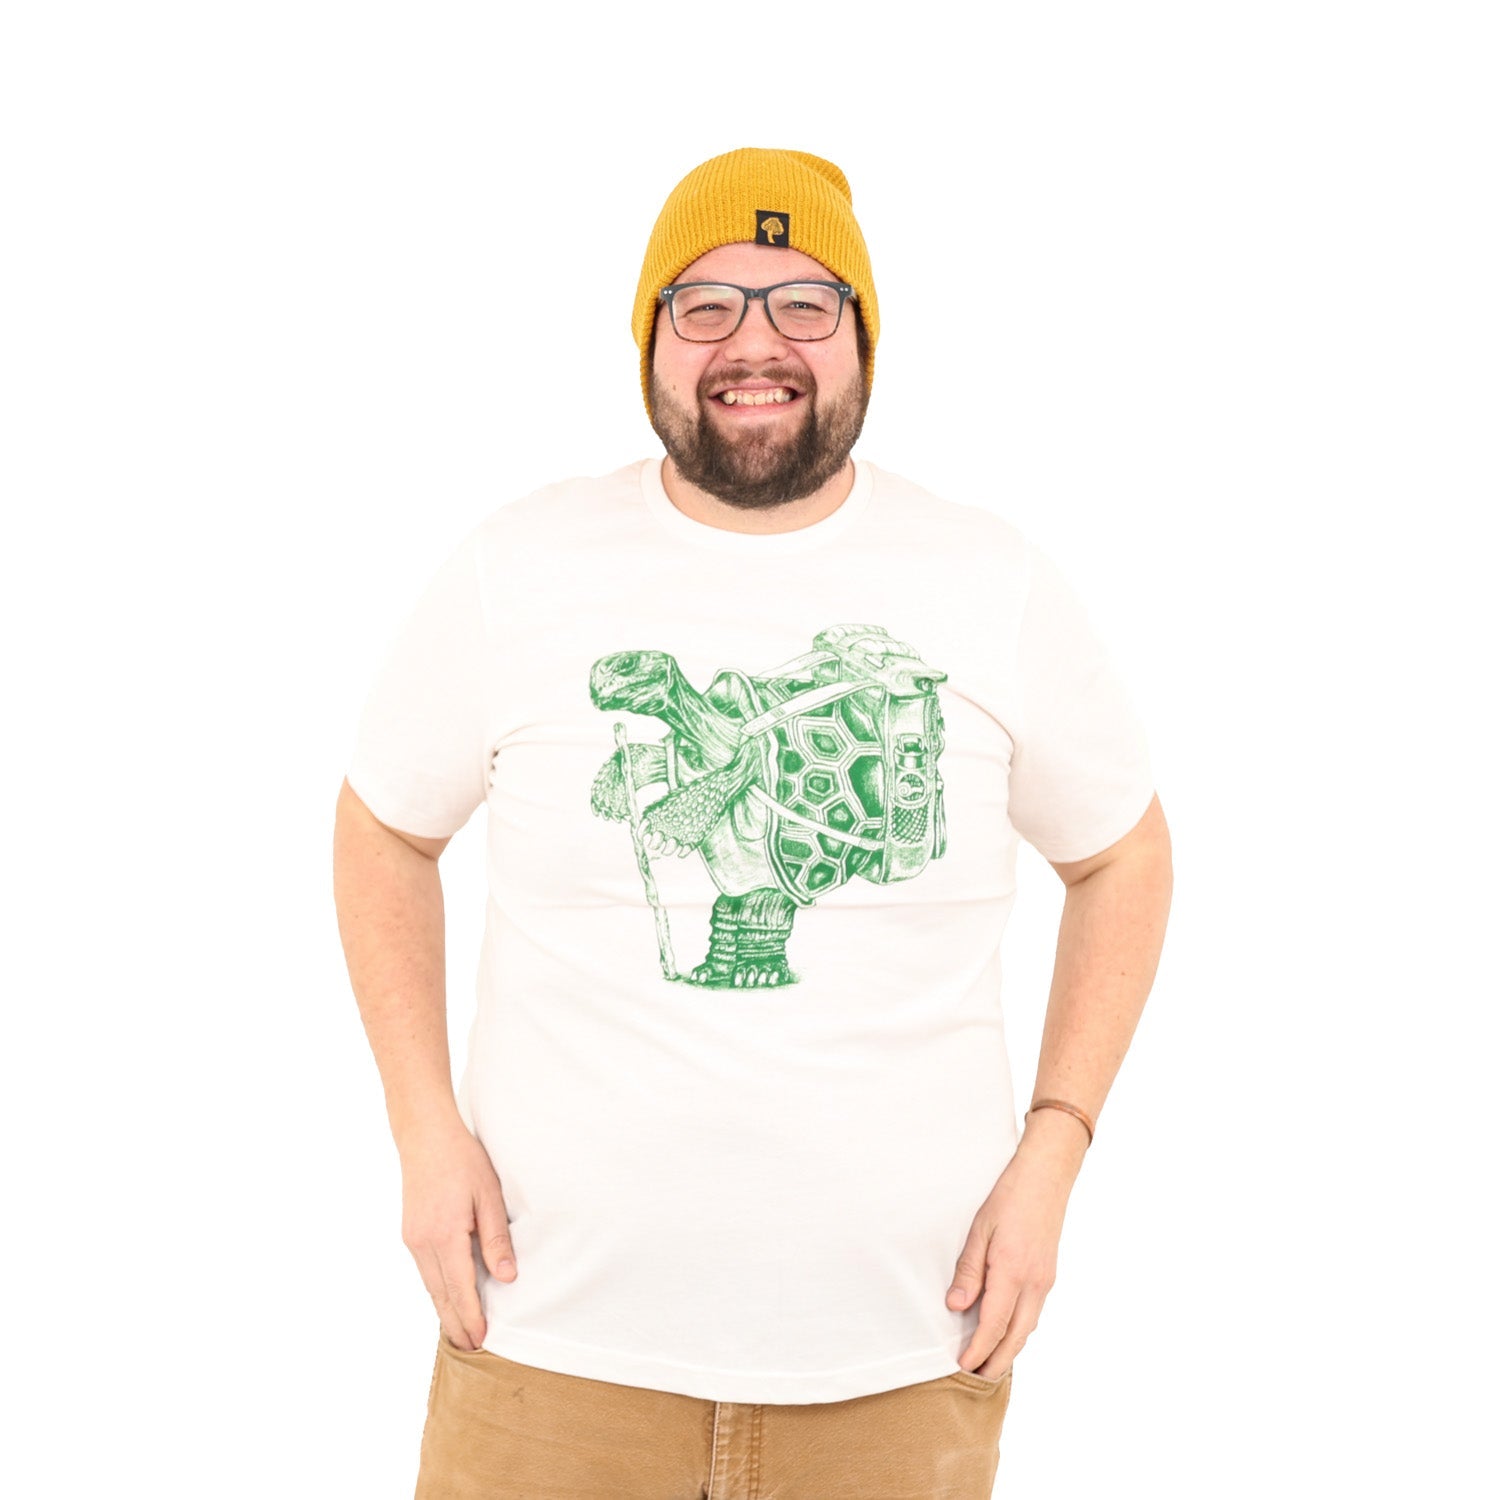 Friendly guy smiling wearing glasses and a mustard colored beanie. Also wearing white shirt with hiking tortoise in green ink